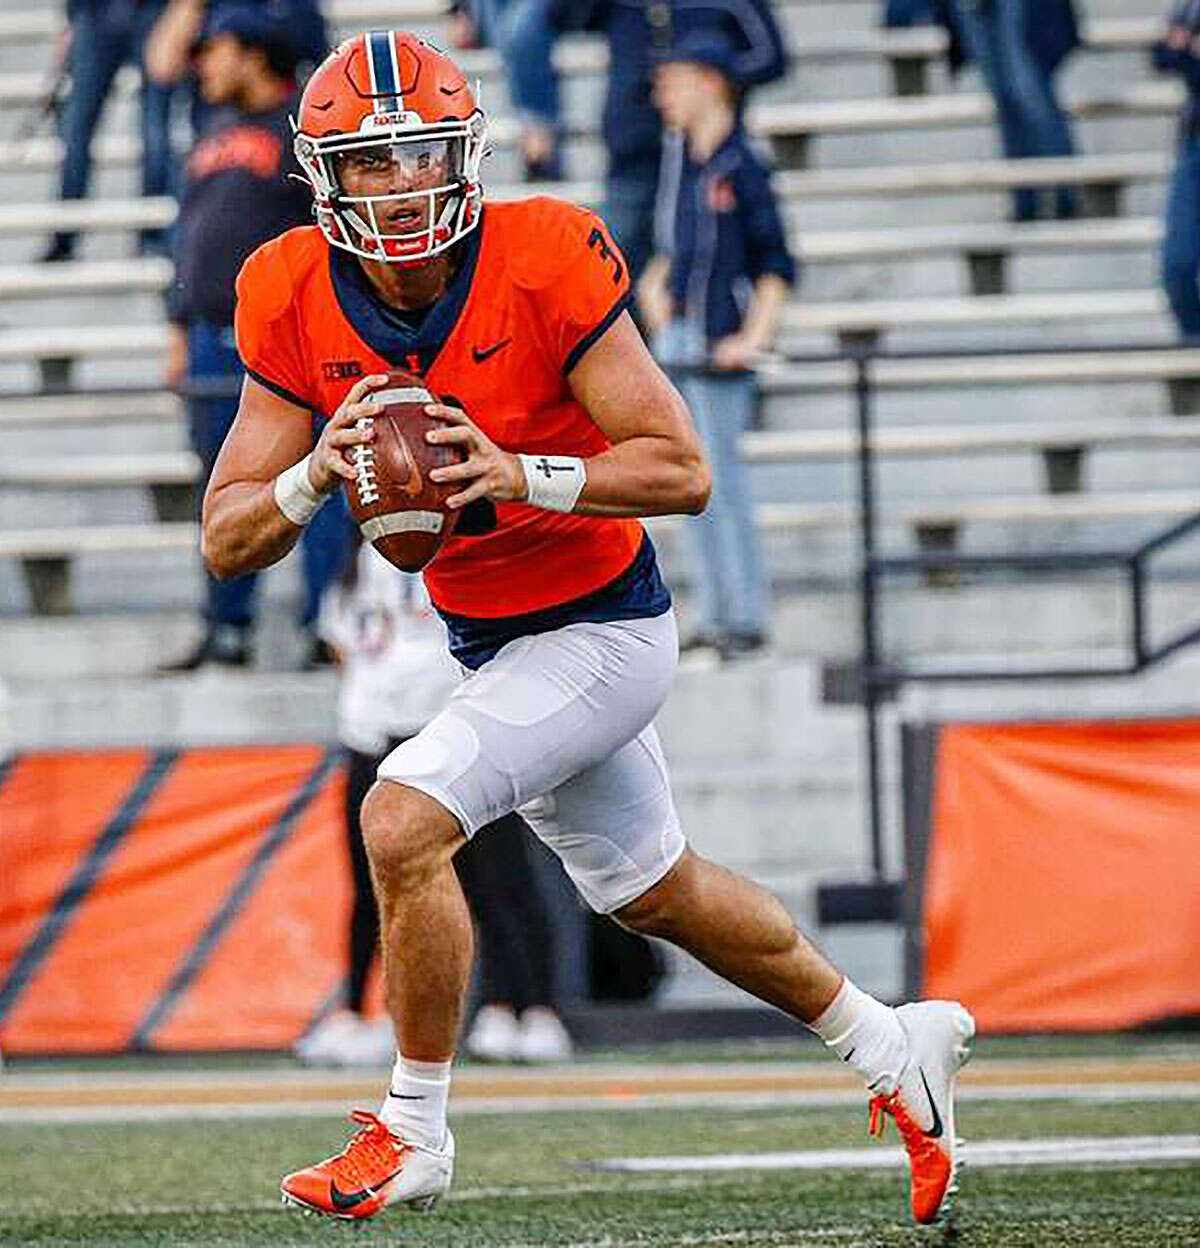 Syracuse transfer Tommy DeVito has been named the starting quarterback for Saturday's Illinois game against Wyoming at 3 p.m. Memorial Stadium.